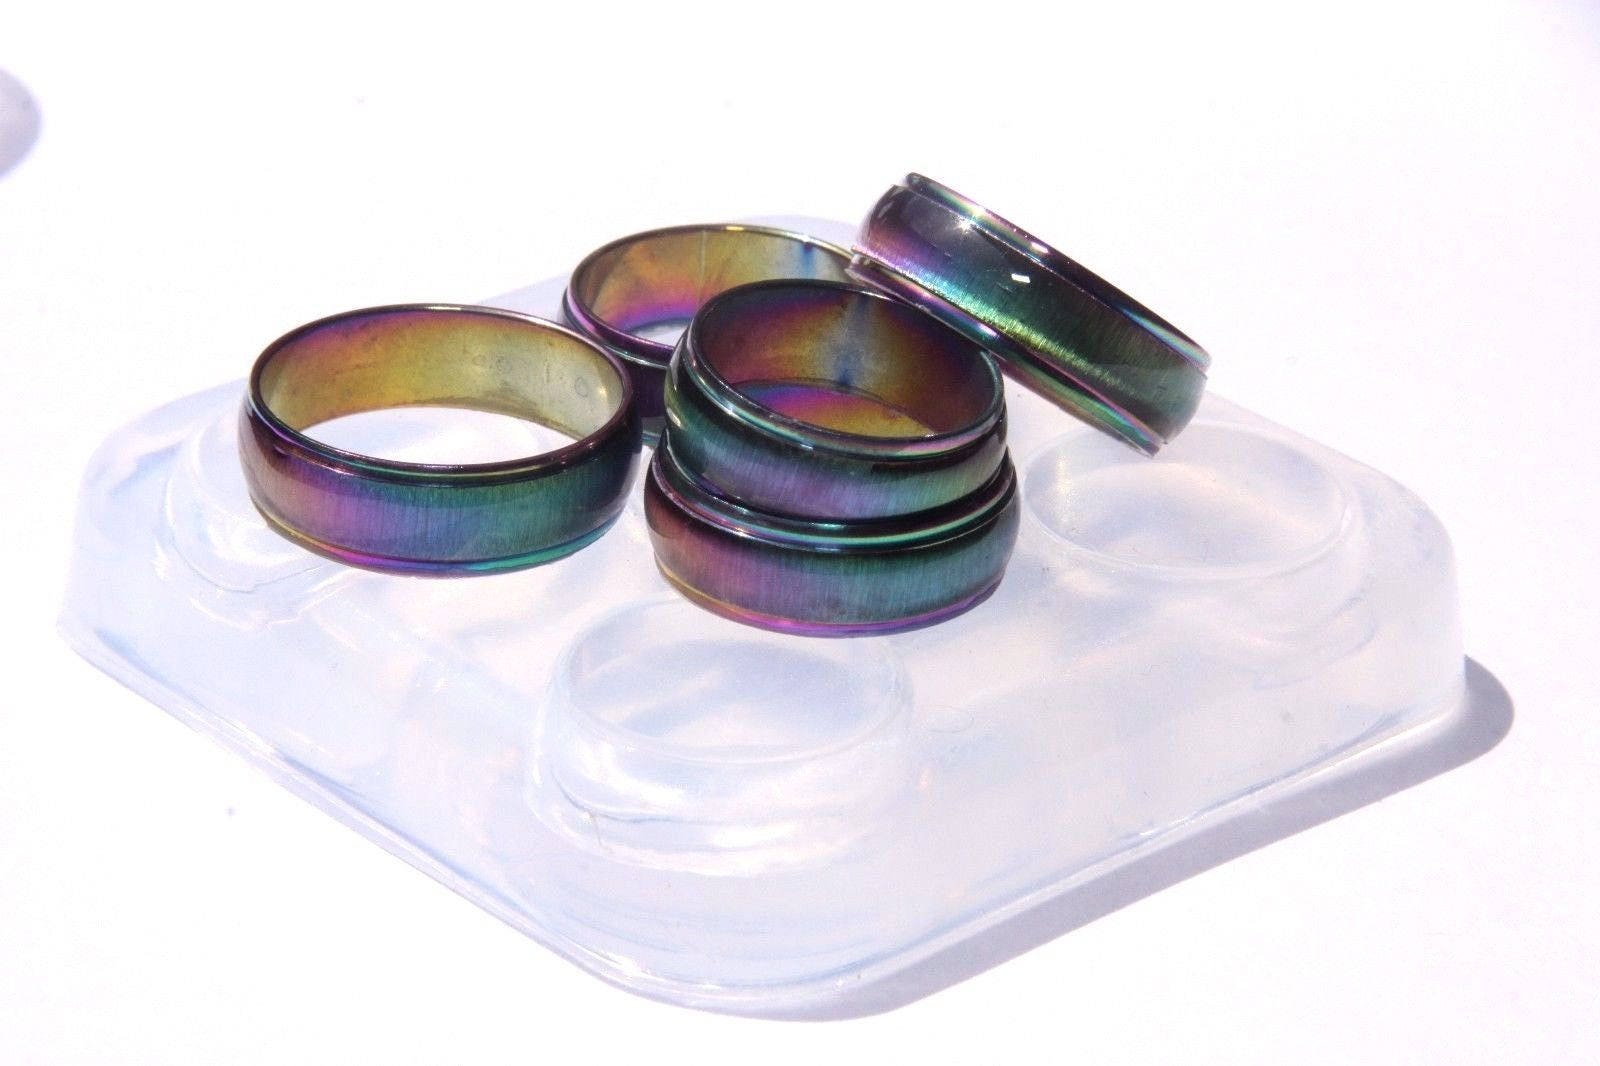 SALE 30 Epoxy resin silicone rings mold for womens Jewelry